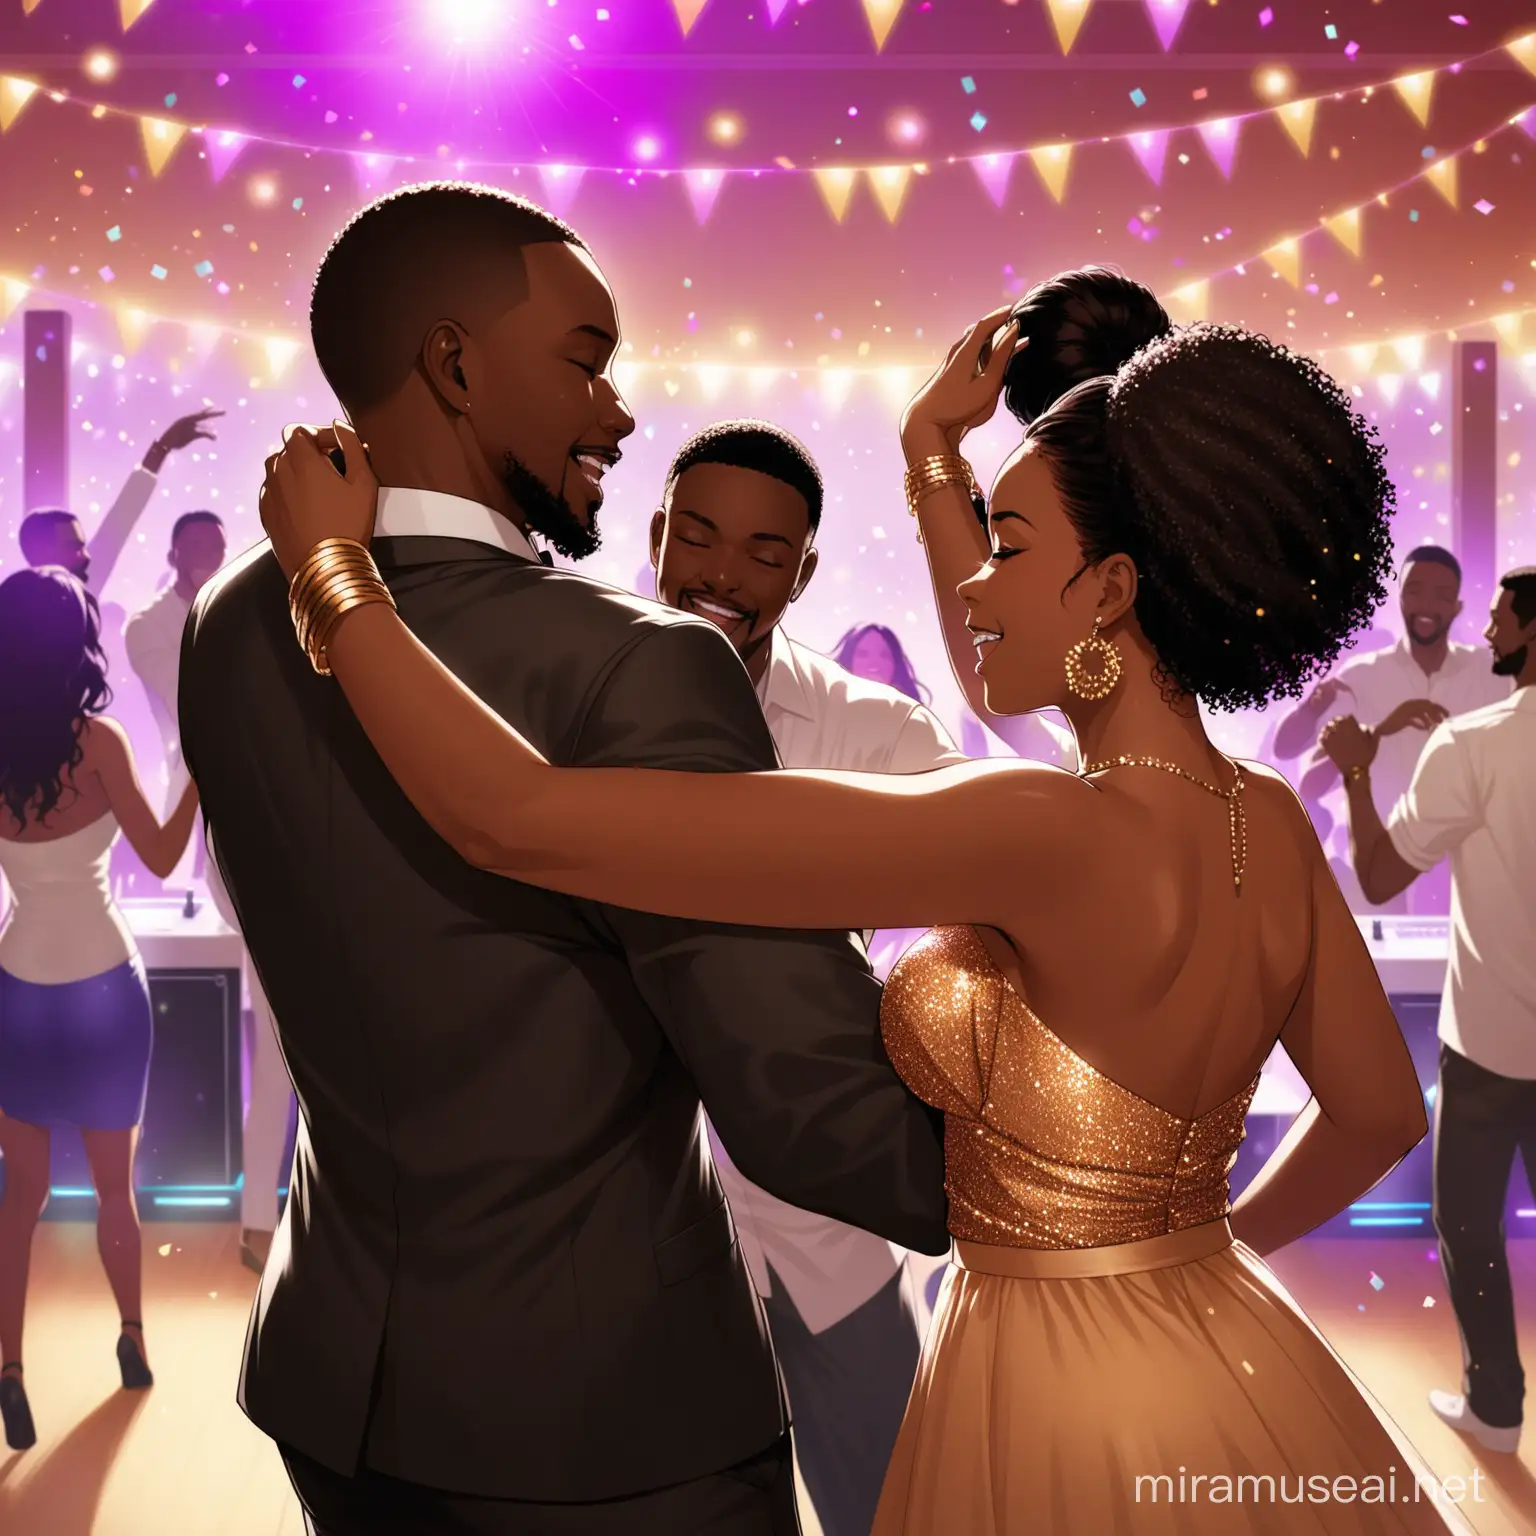 Elegant Black Couple Dancing at Party with DJ in Vibrant Background